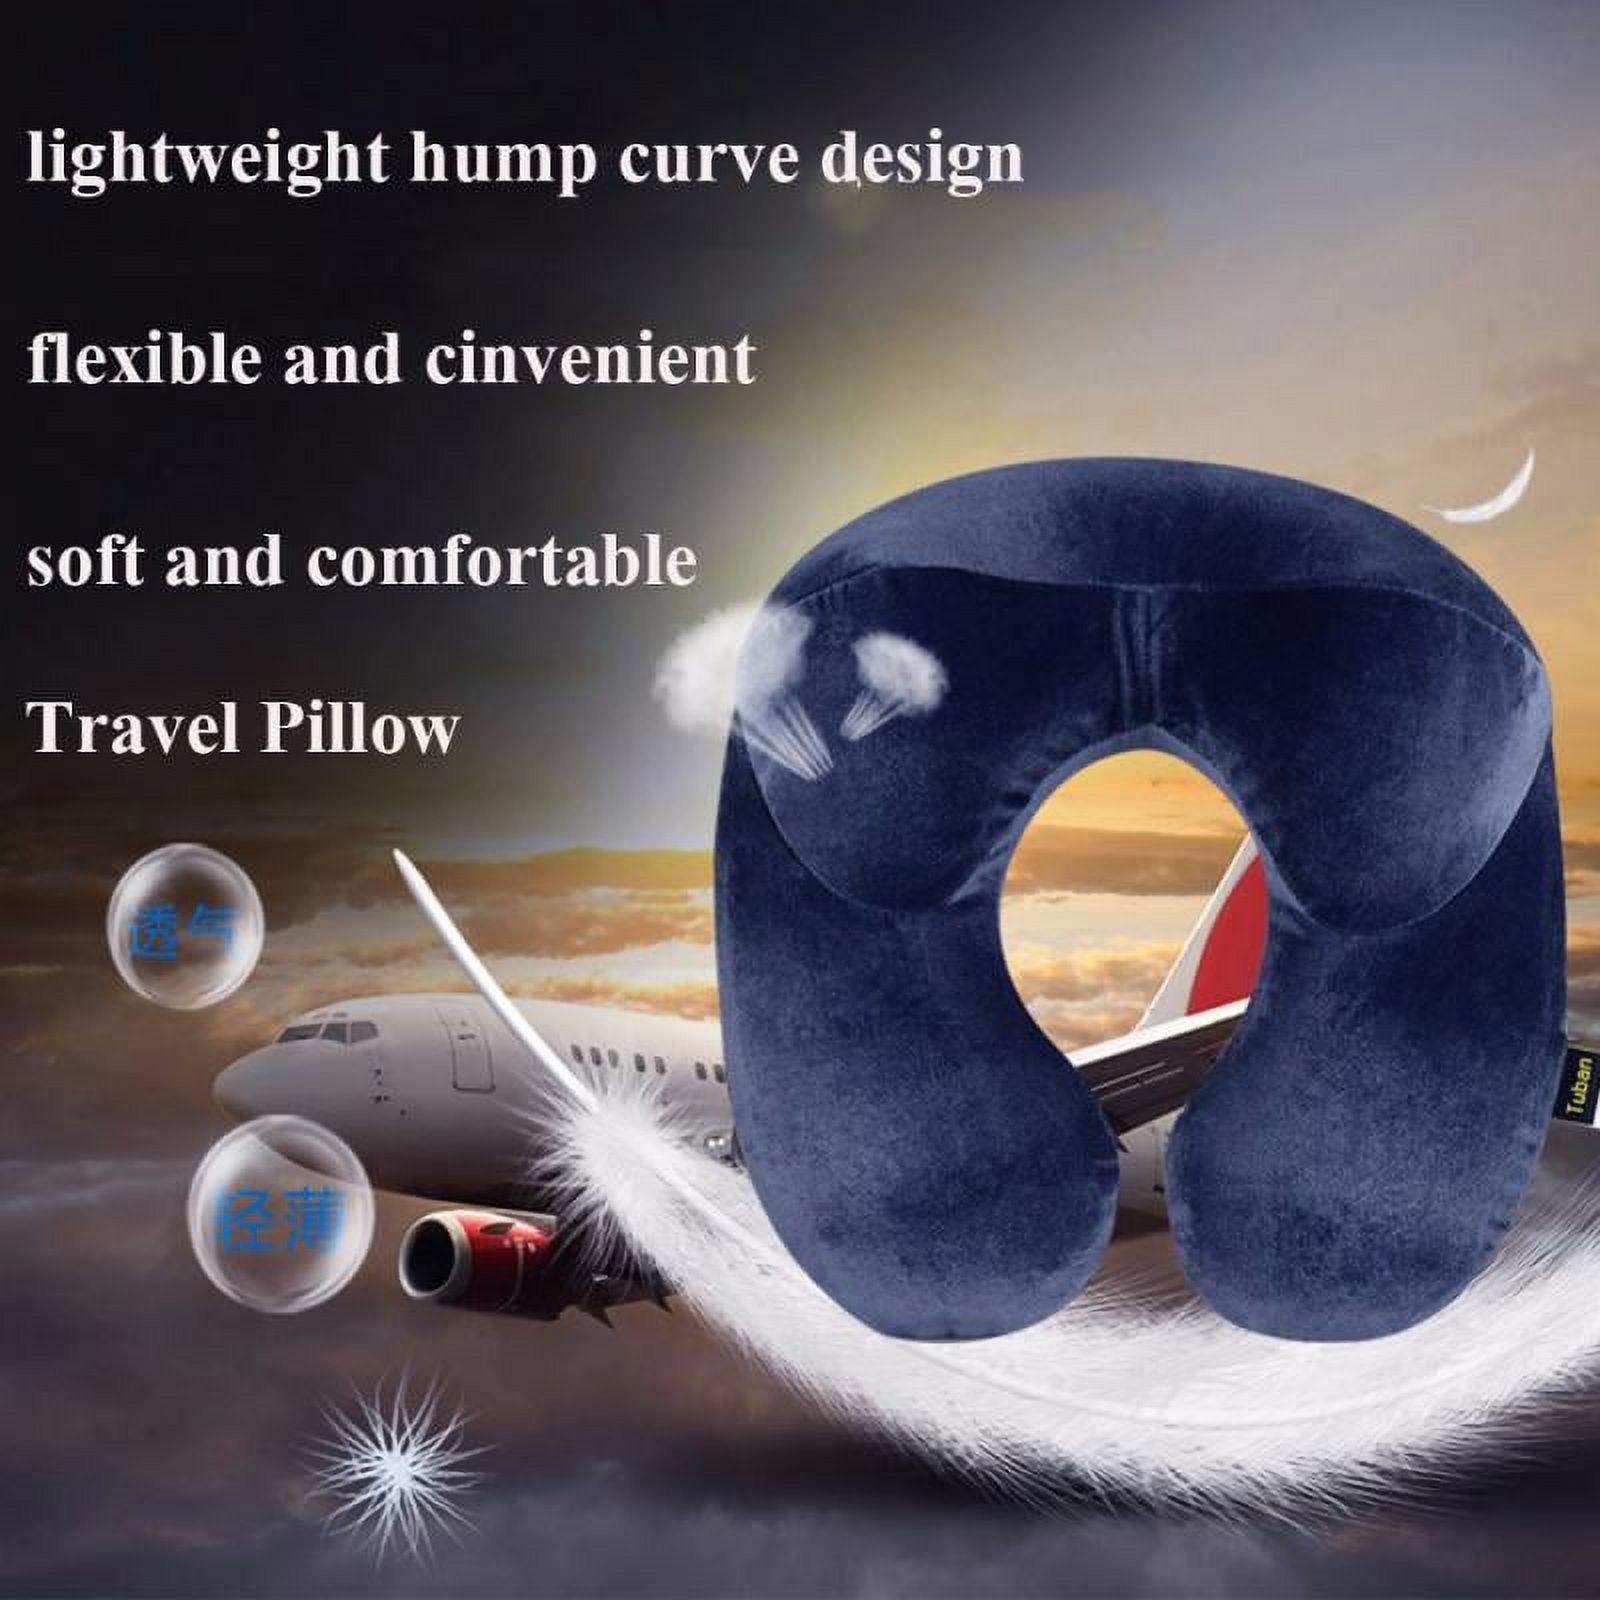 U-Shape Travel Pillow for Airplane Inflatable Neck Pillow Travel Accessories 4 Colors Comfortable Pillows for Sleep Home Textile - image 5 of 6